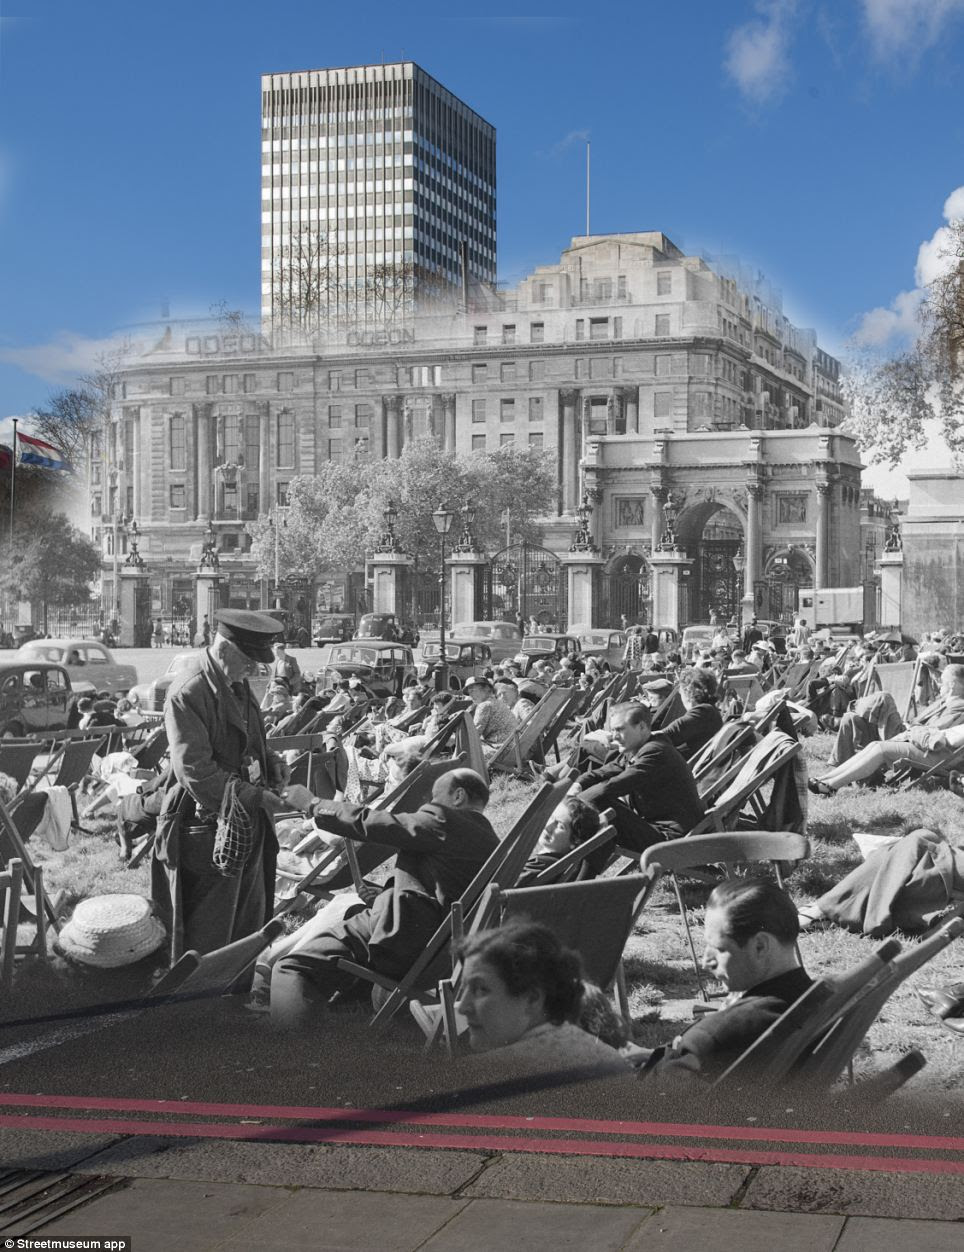 People sunbathing in Hyde Park with Marble Arch and the Odeon cinema in the background. The attendant is selling tickets for the deckchairs which are available for hire in the park. The Odeon which was originally a Regal cinema, opened in 1928. The exterior of the building was made from Portland Stone and featured columns and statues however in 1964 it was thought too small and the building was demolished and a larger cinema complex was built in its place